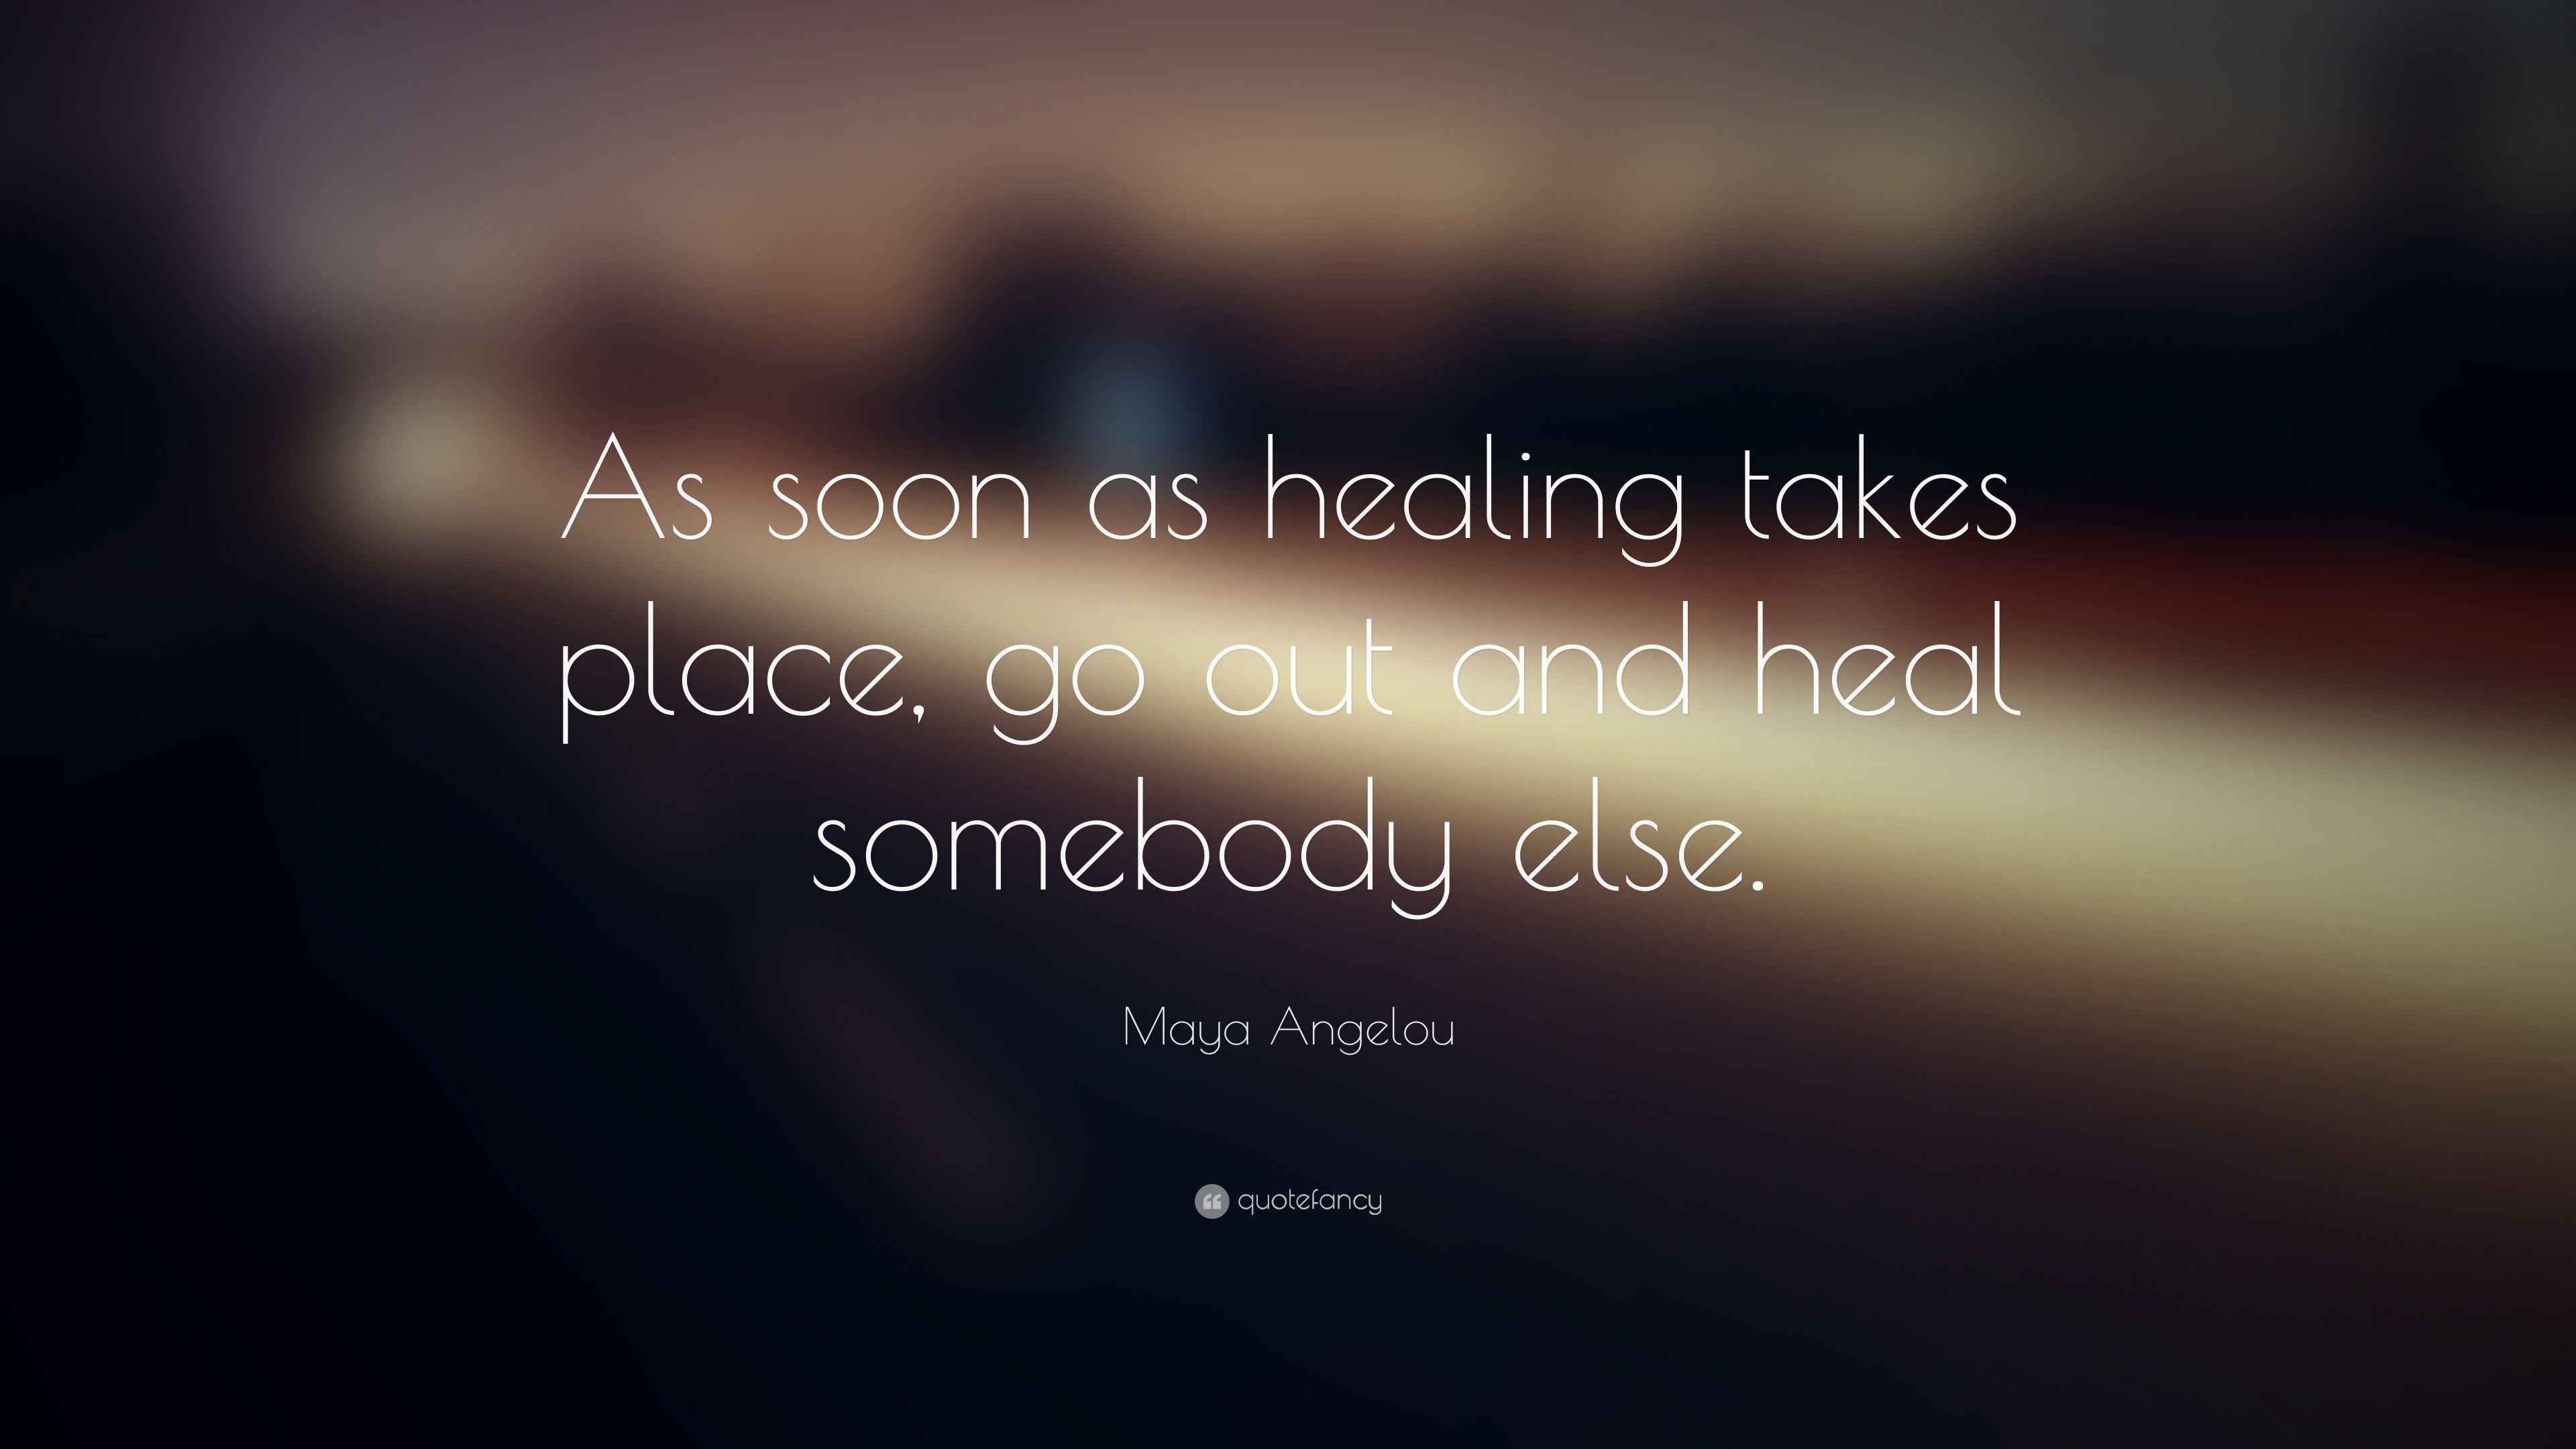 Maya Angelou Quote: “As soon as healing takes place, go out